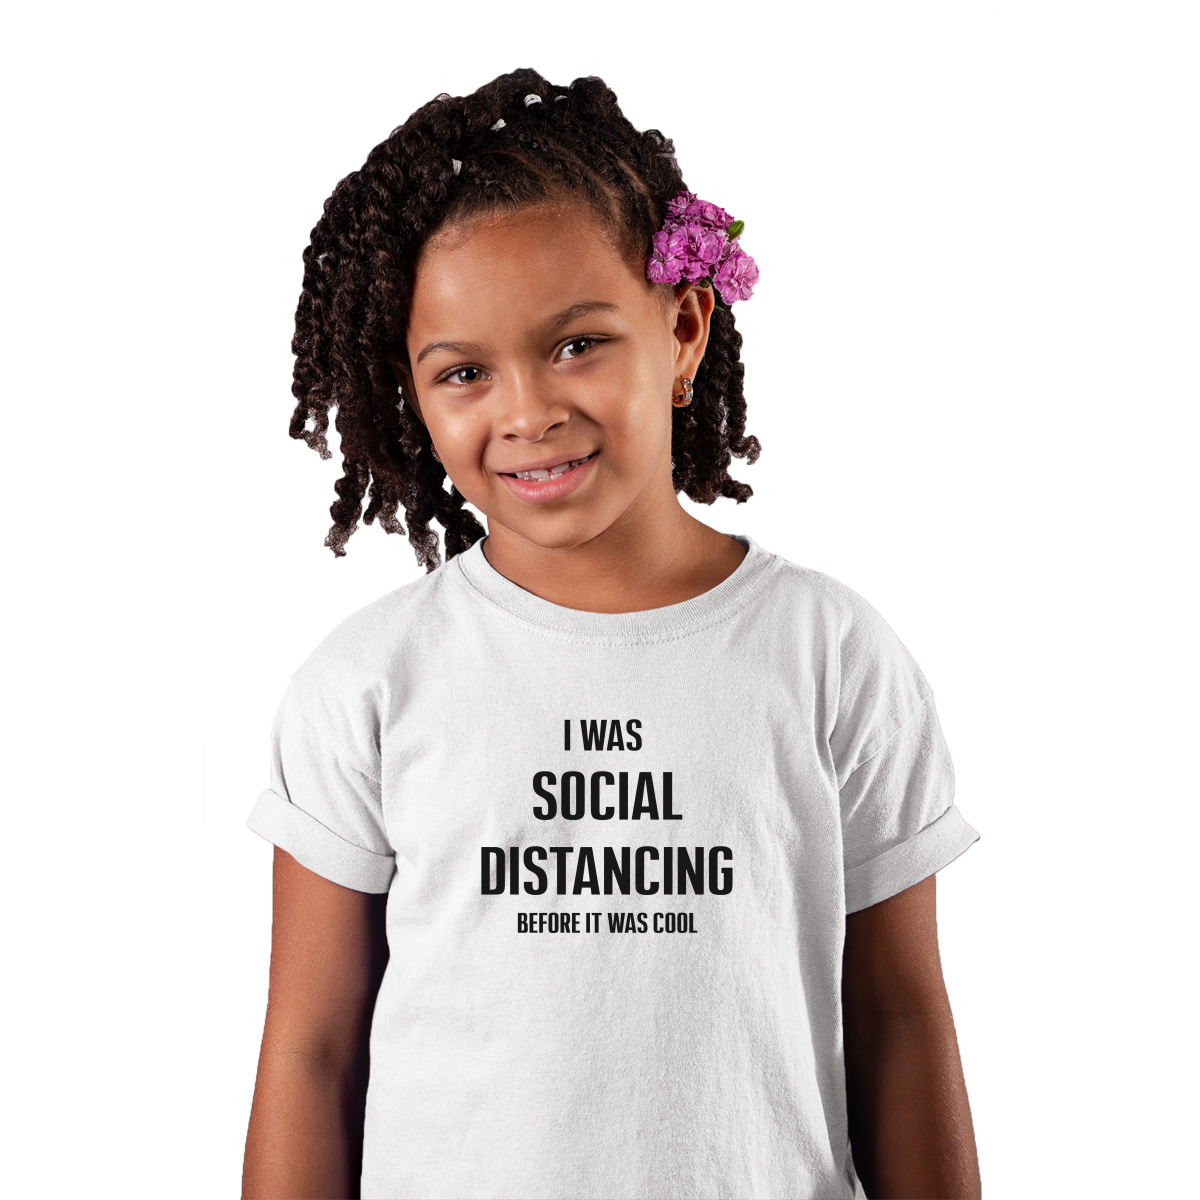 I was social distancing before it was cool Kids T-shirt | White